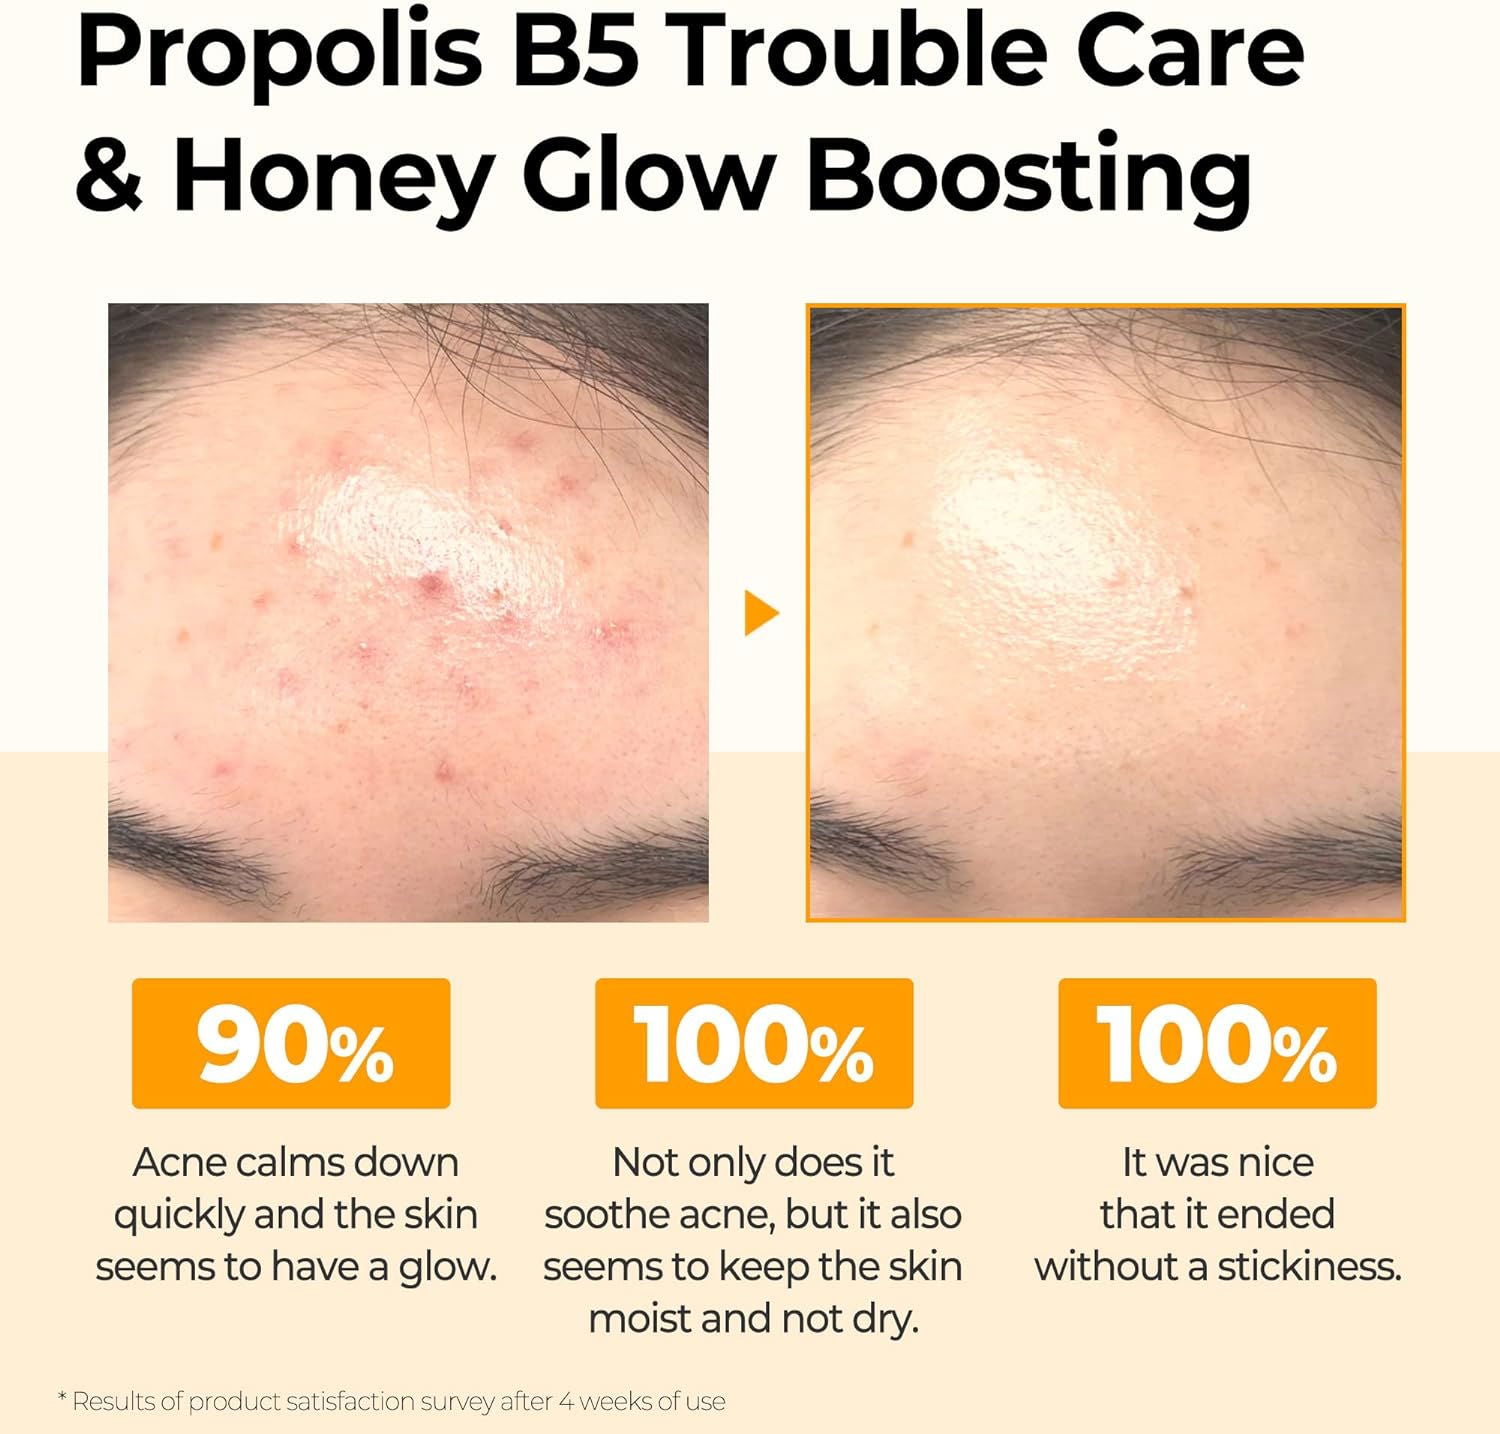 SOME BY MI Propolis B5 Glow Barrier Calming Toner - Miessential